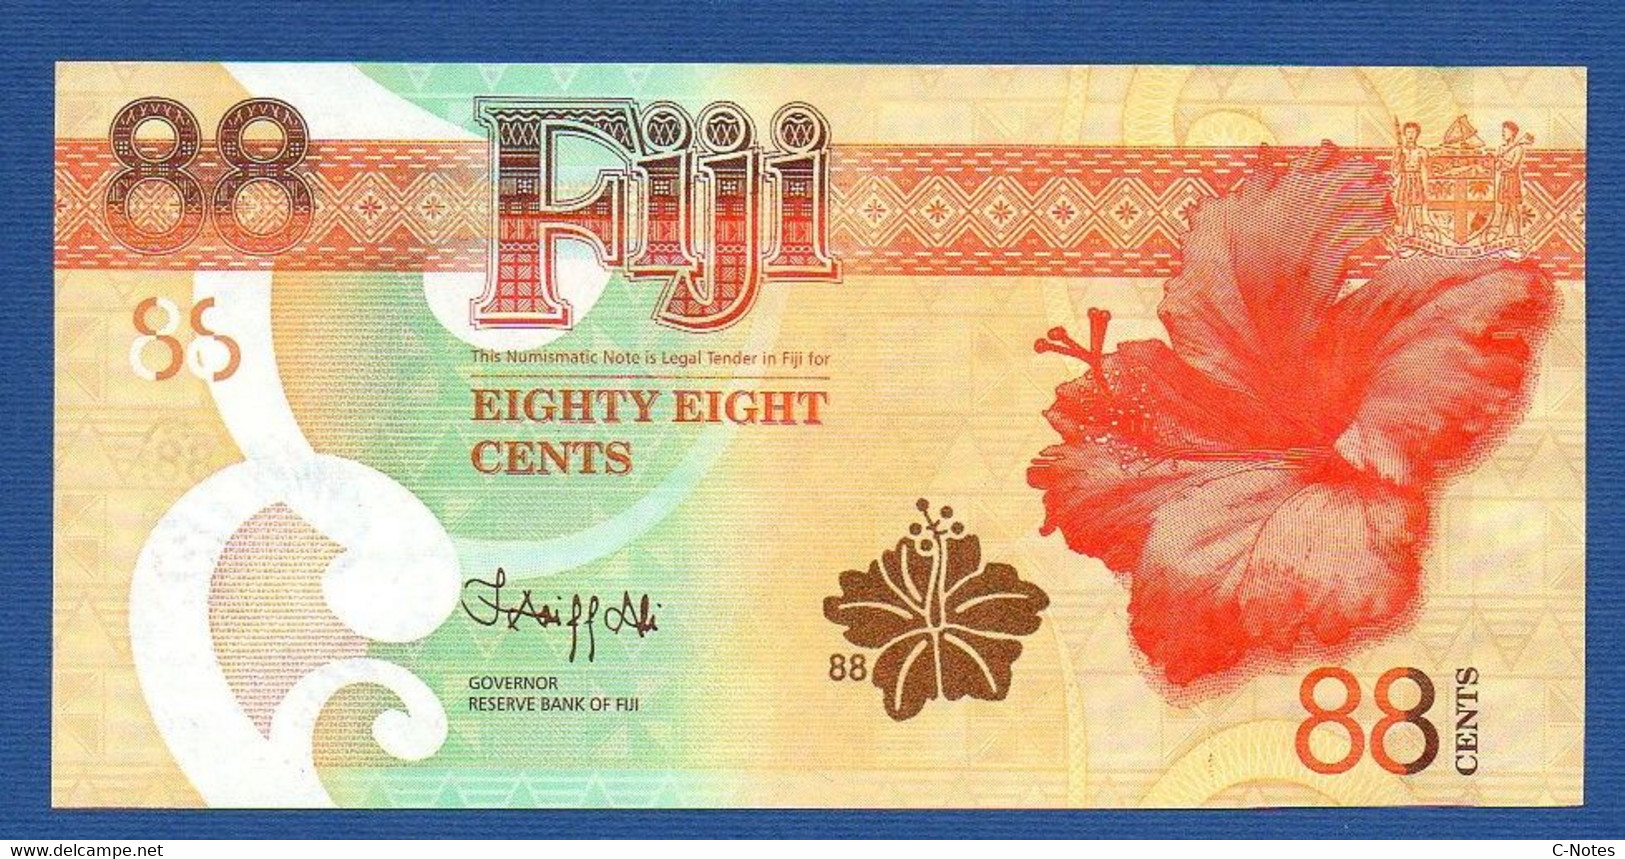 FIJI - P.W123 (1) – 88 Cents  ND (2022) UNC Serie AB19620232 "Numismatic Banknote 88 Cents" Commemorative Issue - Fidschi